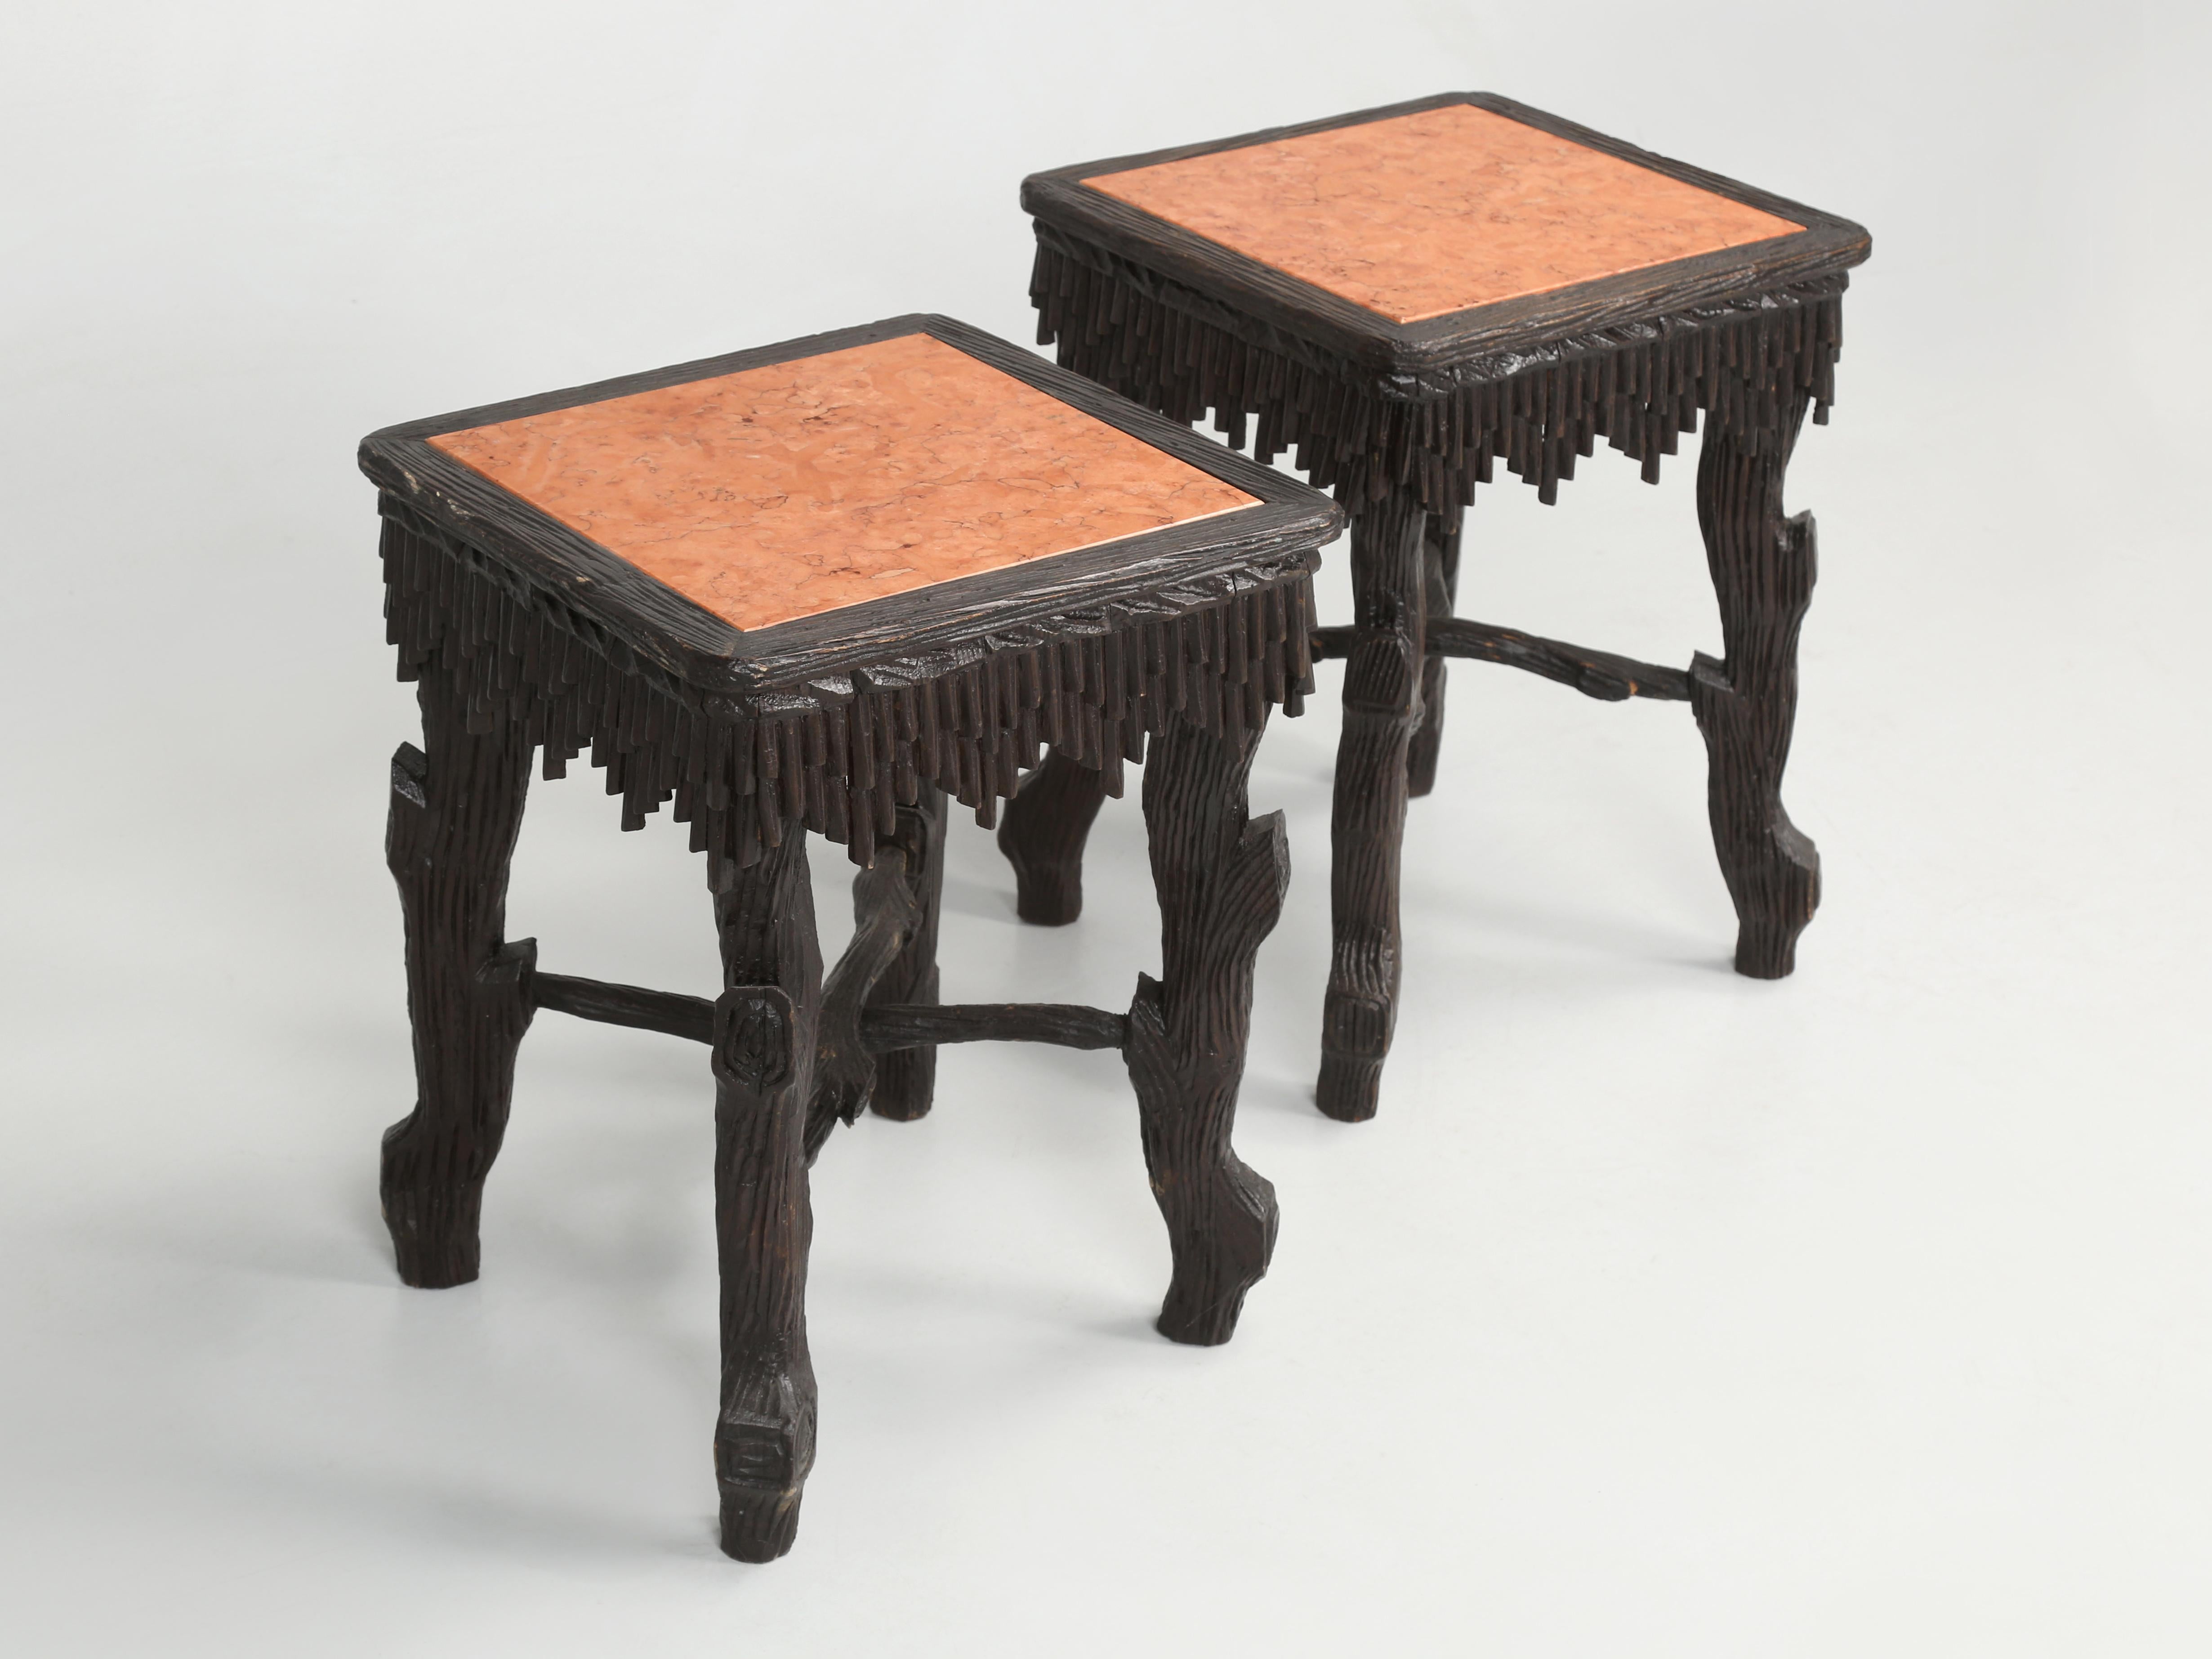 Pair of black forest hand-carved end tables or side tables with marble tops that were made in Switzerland during the late 1800s. Finding one piece of black forest is difficult enough, but locating a pair is unusual to say the least. The history of